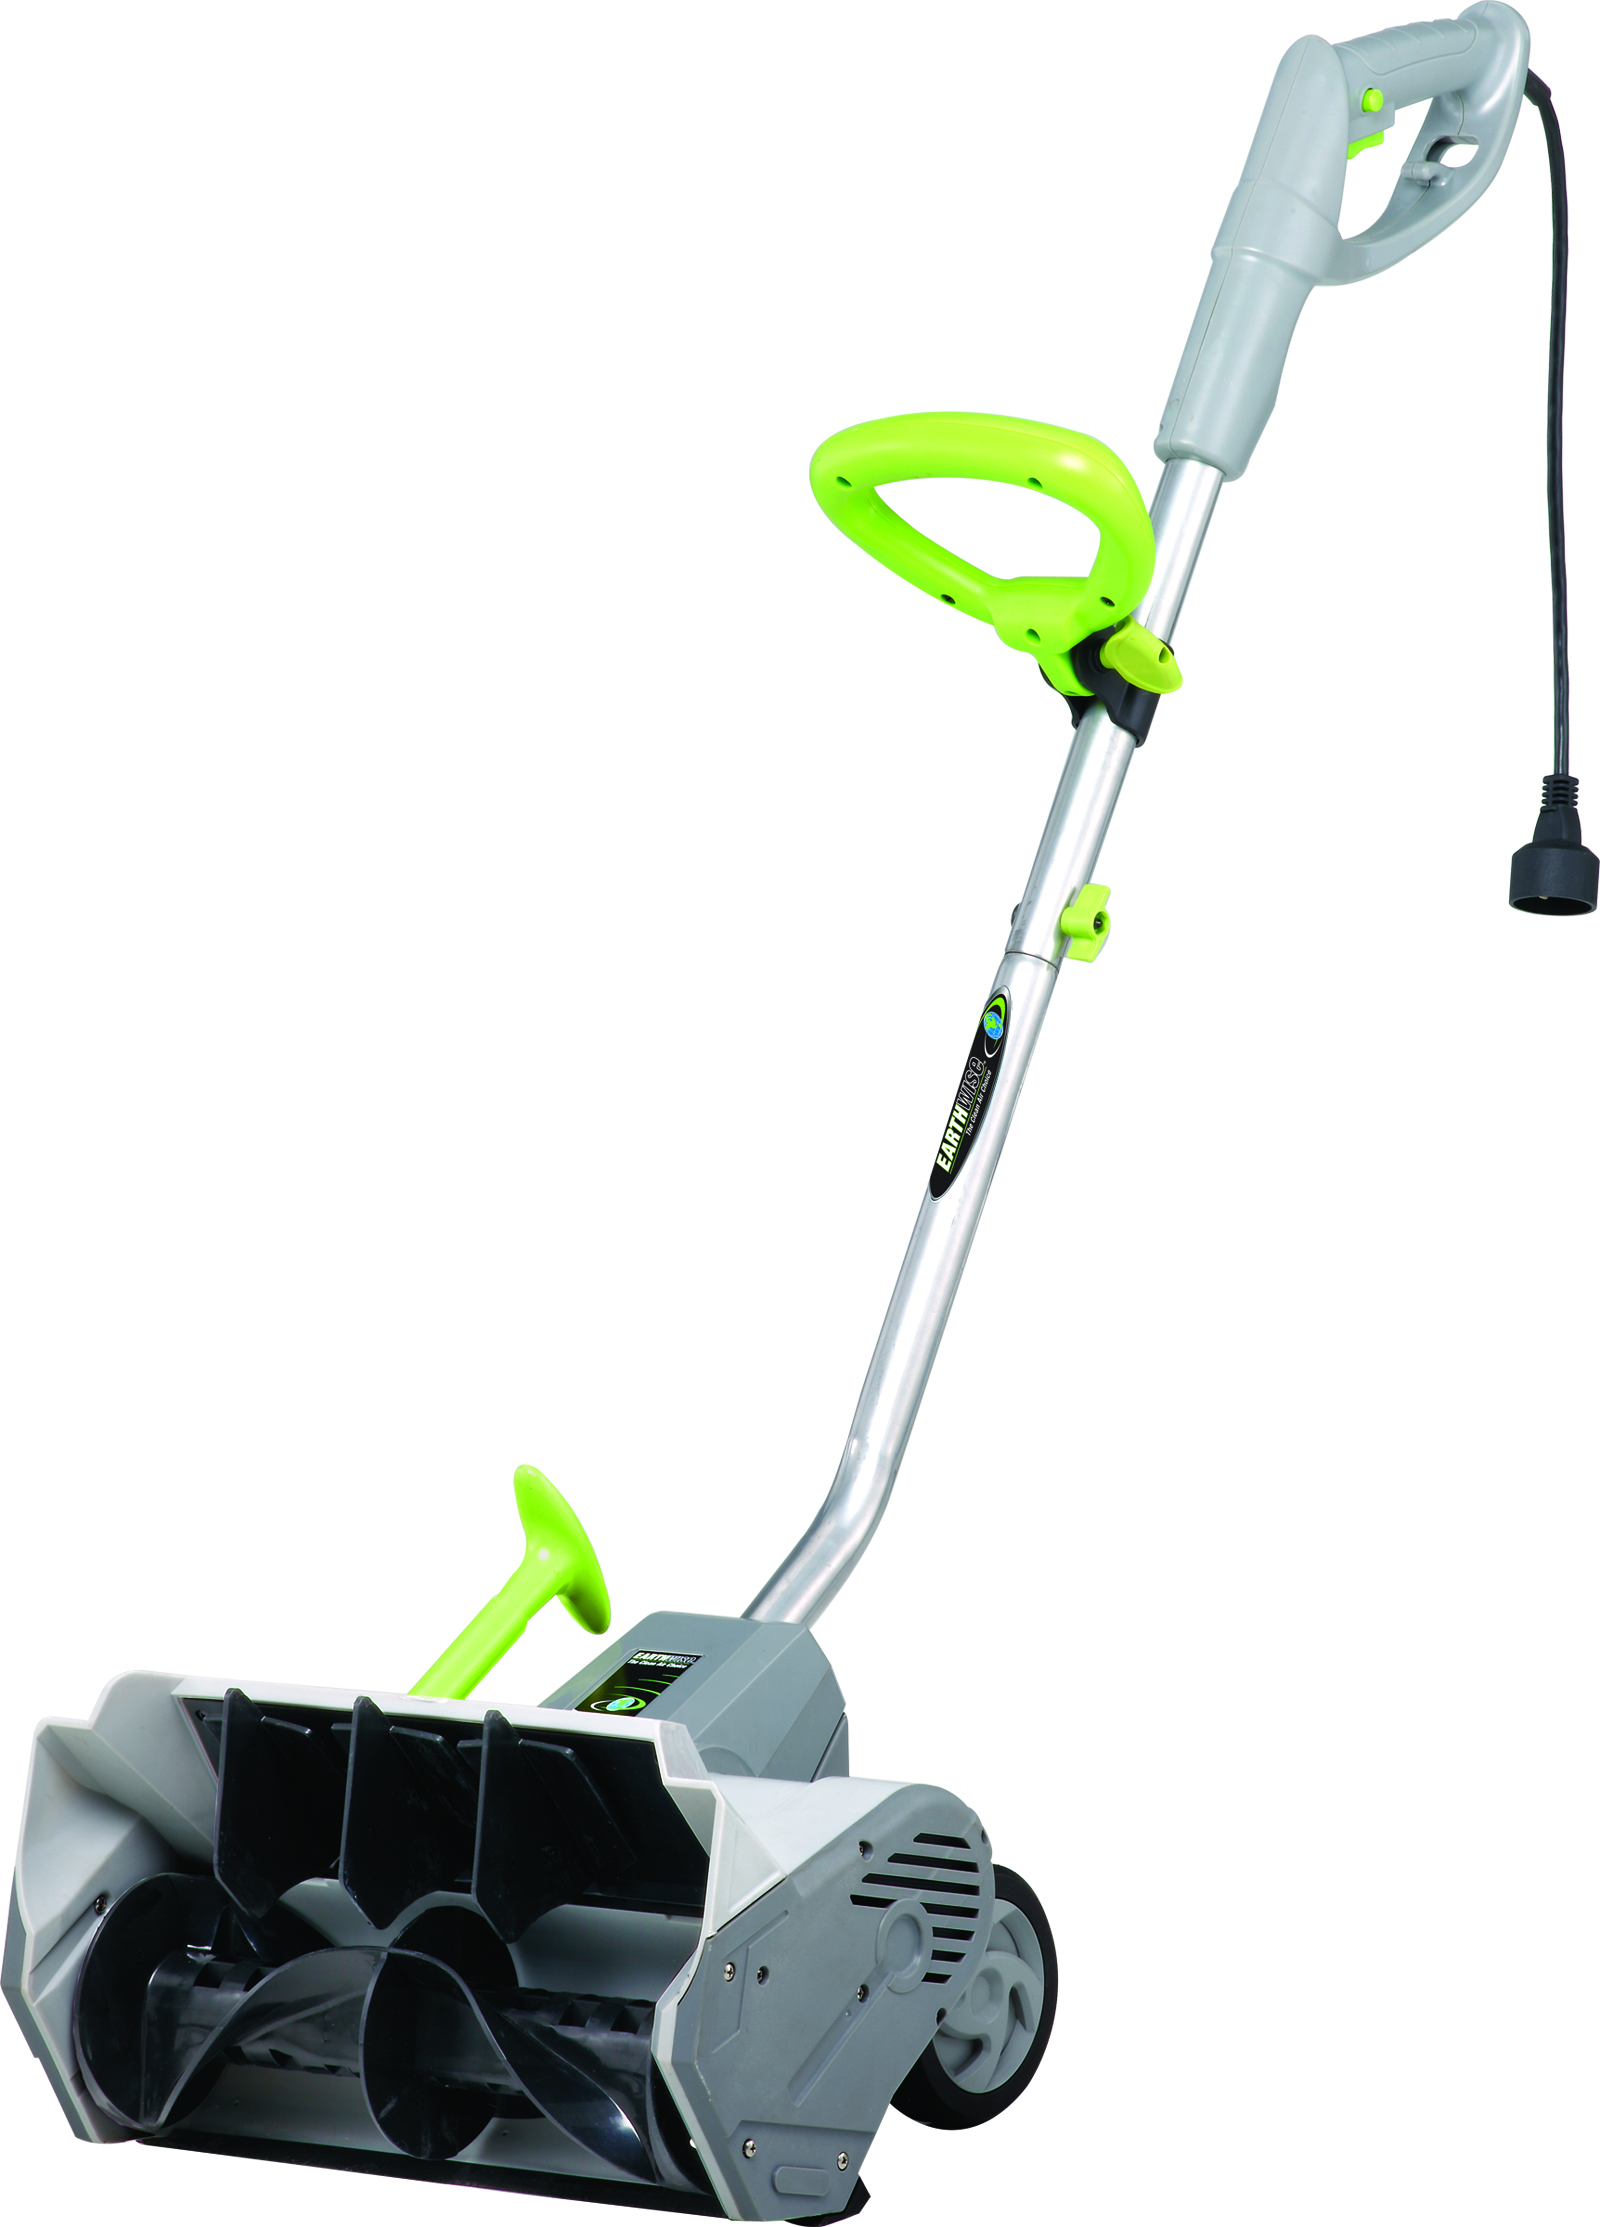 Earthwise 16" Wide Snow Shovel, Corded Electric Snow Thrower Shovel - 430 LBS/Minute, SN70016 - image 2 of 5